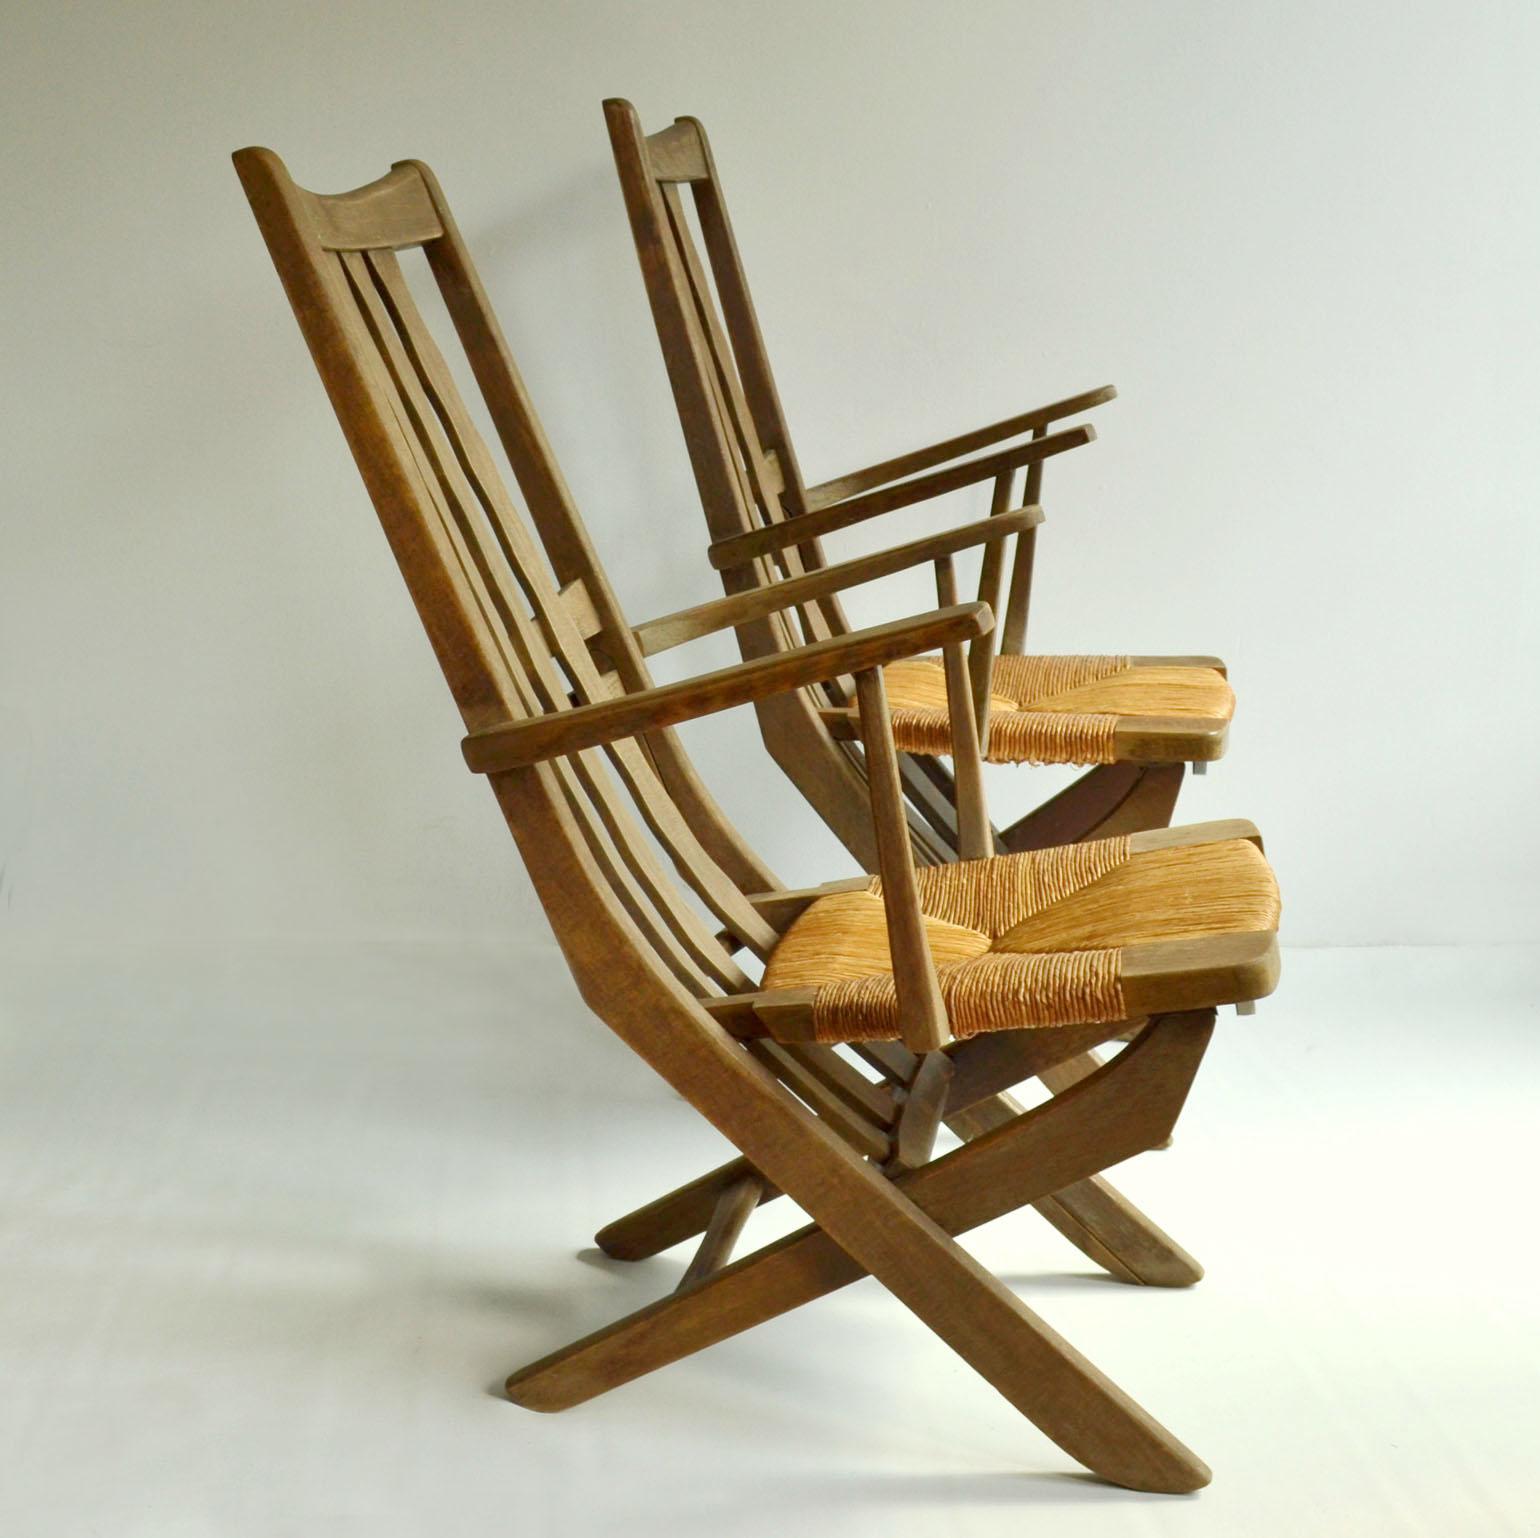 A pair of adjustable oak outdoor of garden chairs in the French modernist style of the 1950's. The reed seated chairs can be adjusted in three comfortable positions; upright, relaxed and reclining similar to the deck chairs. The positioning is easy